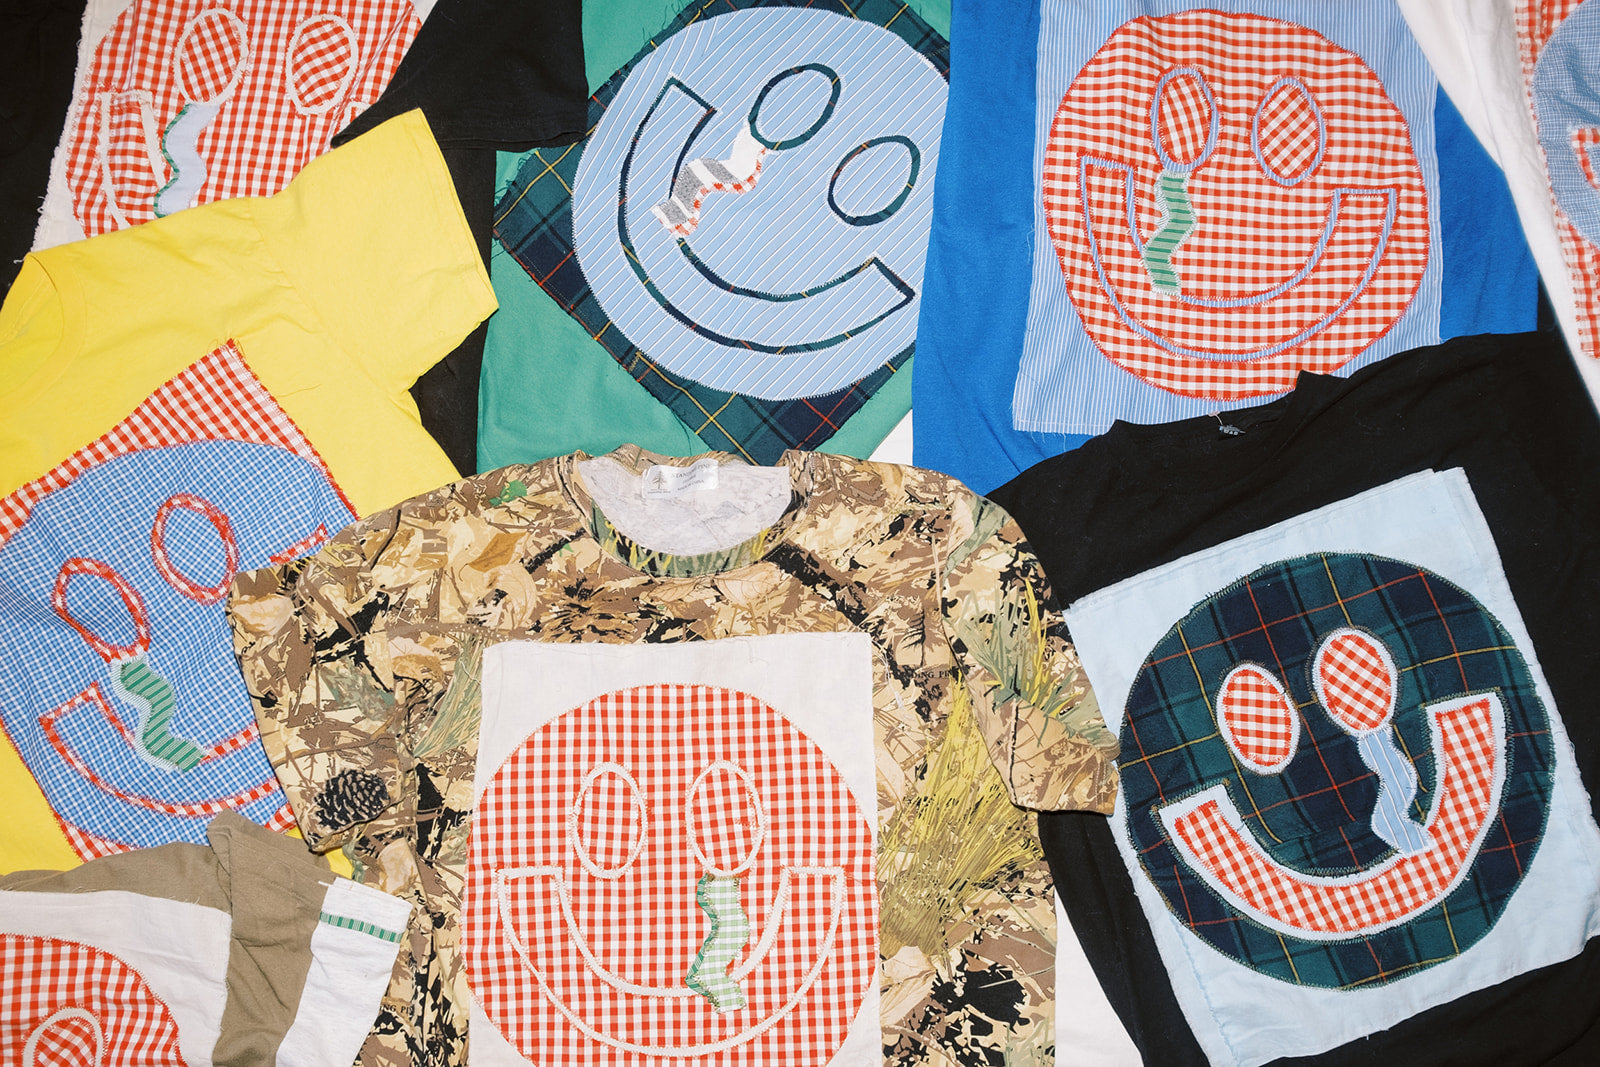 An array of colorful, vibrant, upcycled and patchwork tees, t-shirts, handmade in Brooklyn with thrifted and vintage materials